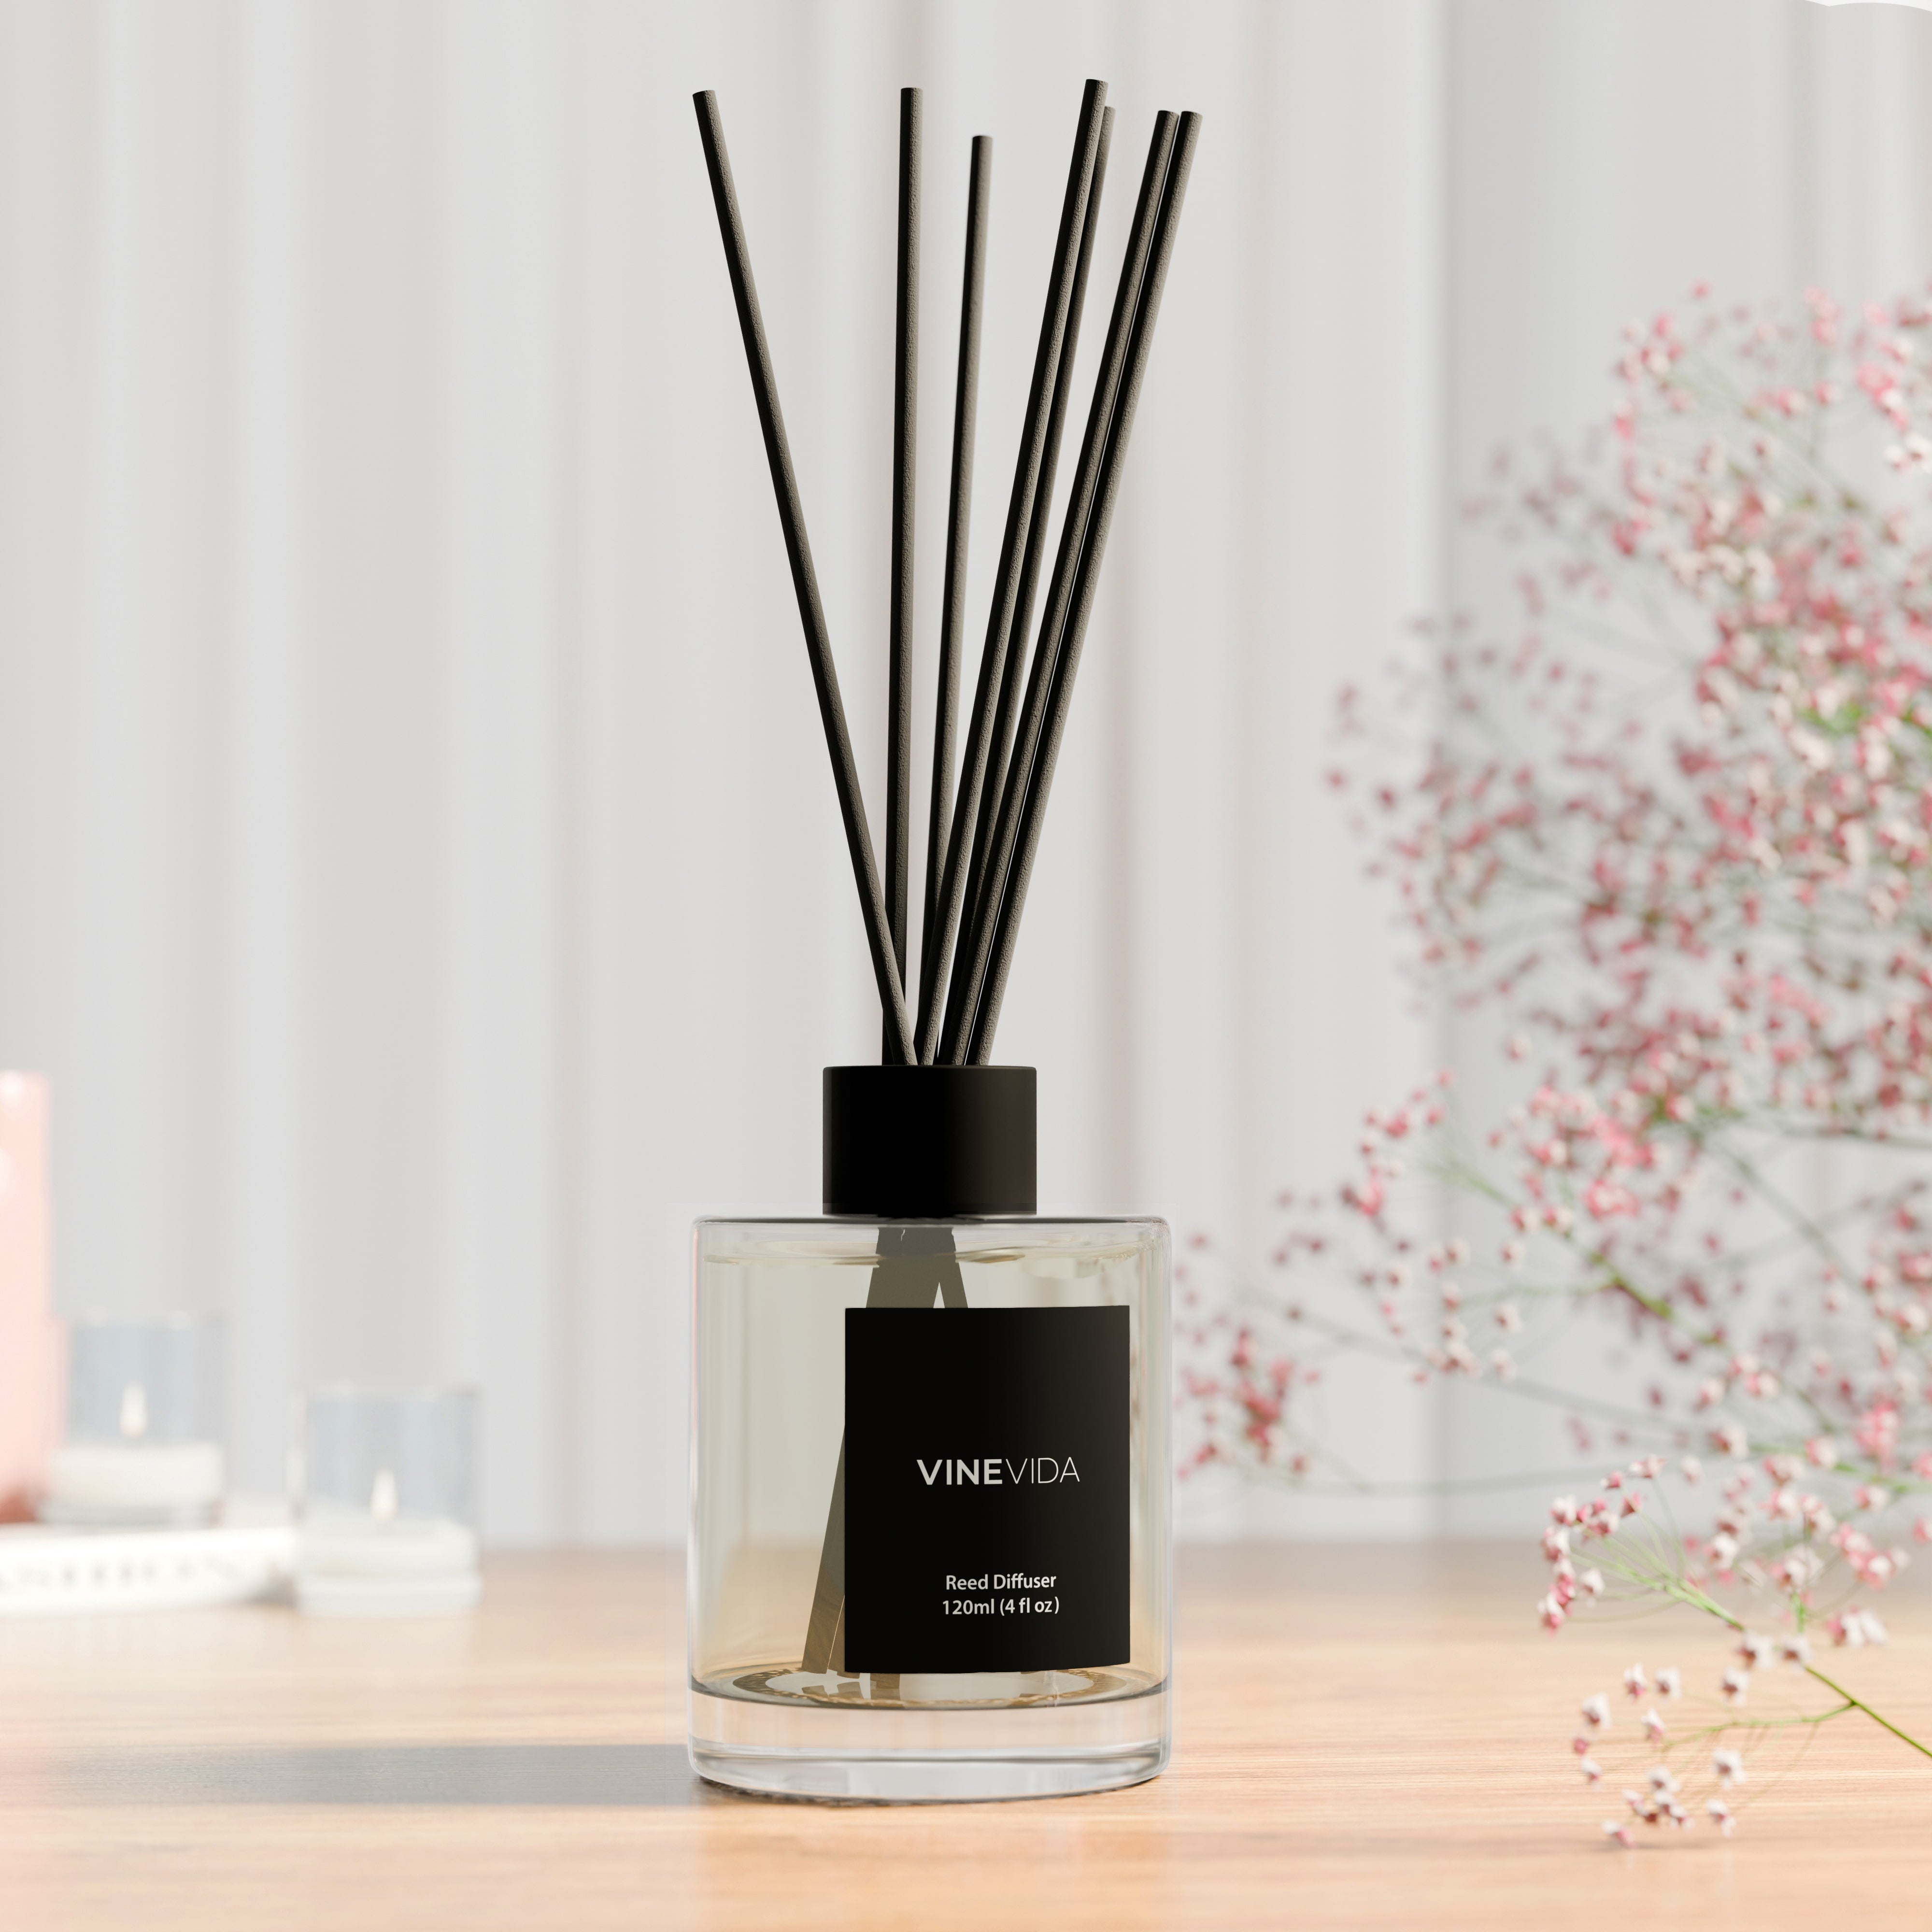 NO. 1405 Reed Diffuser - Inspired by: Lemongrass & Ginger by Nest